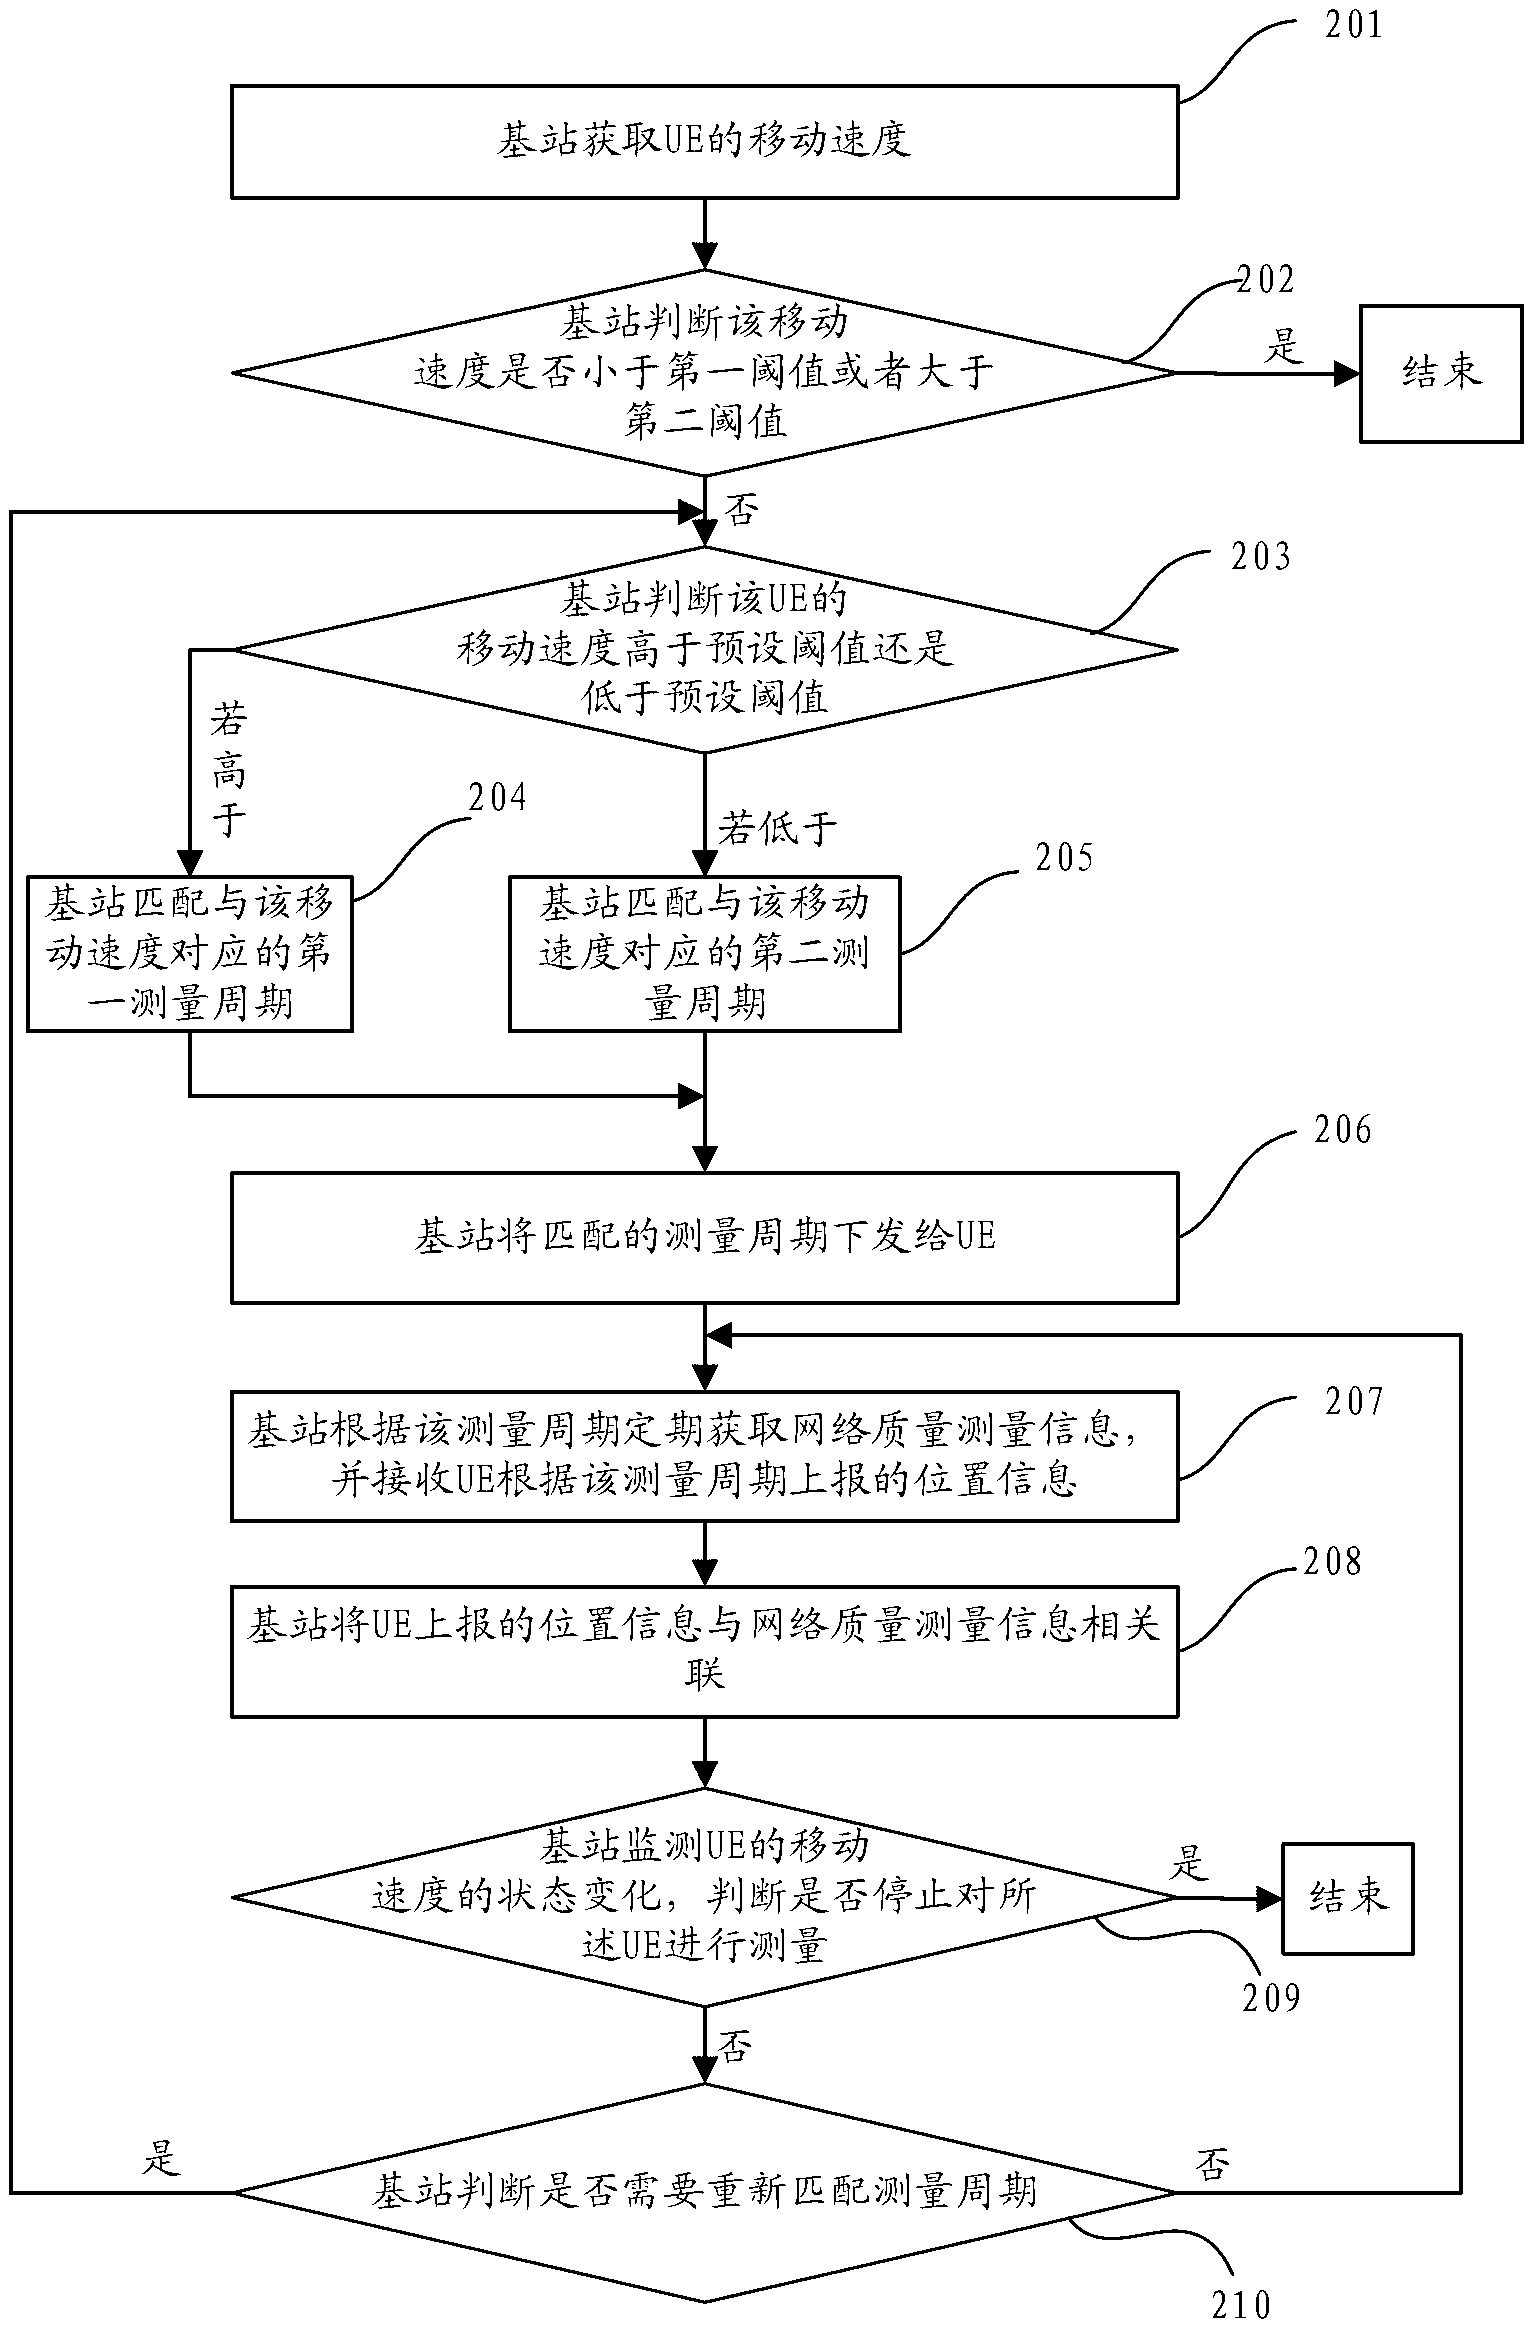 Method and device for treating minimization of drive tests